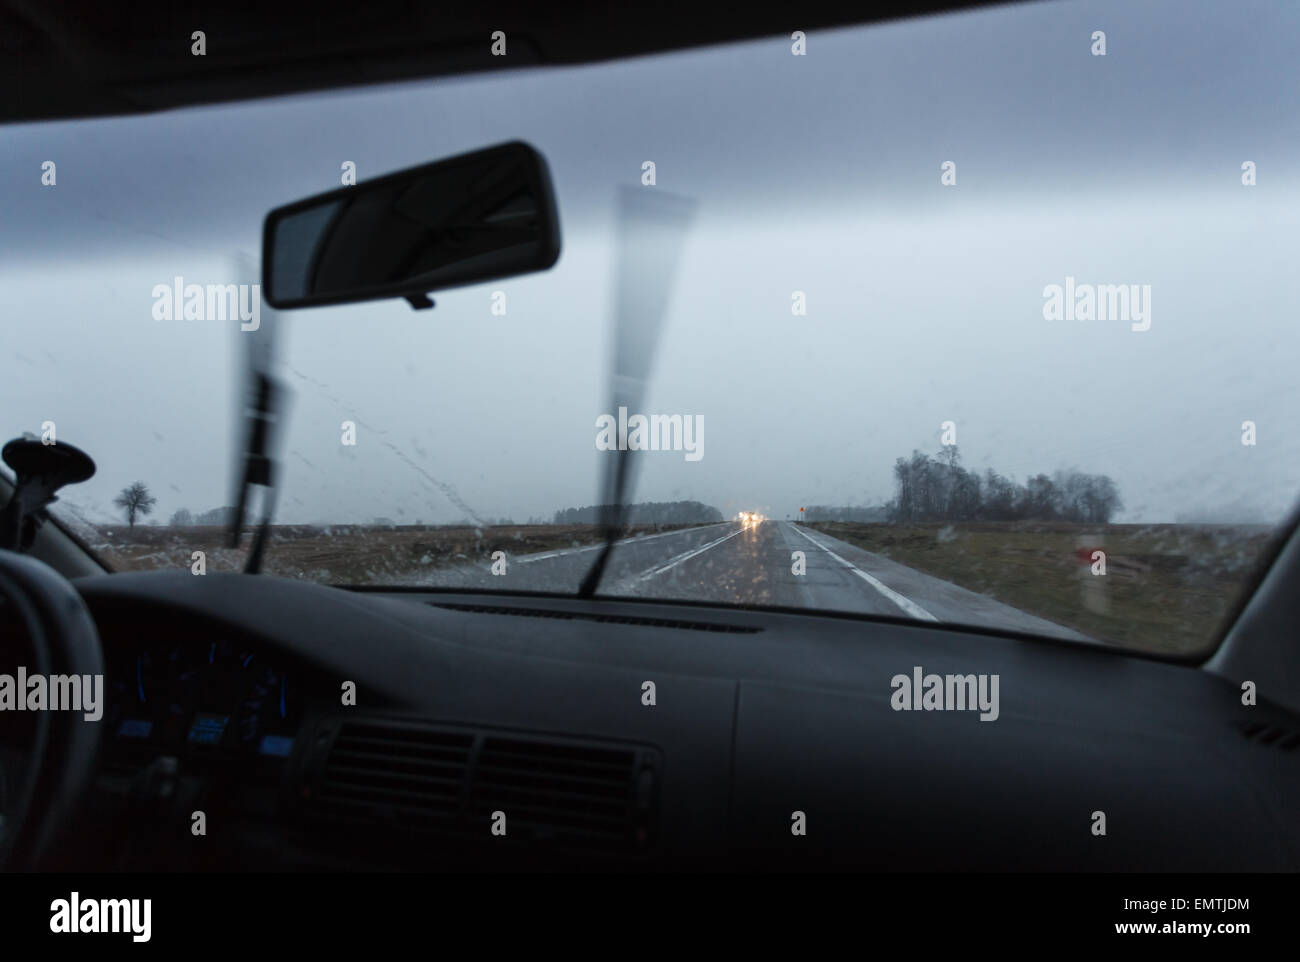 Bad weather conditions driving a car, wipers working Stock Photo